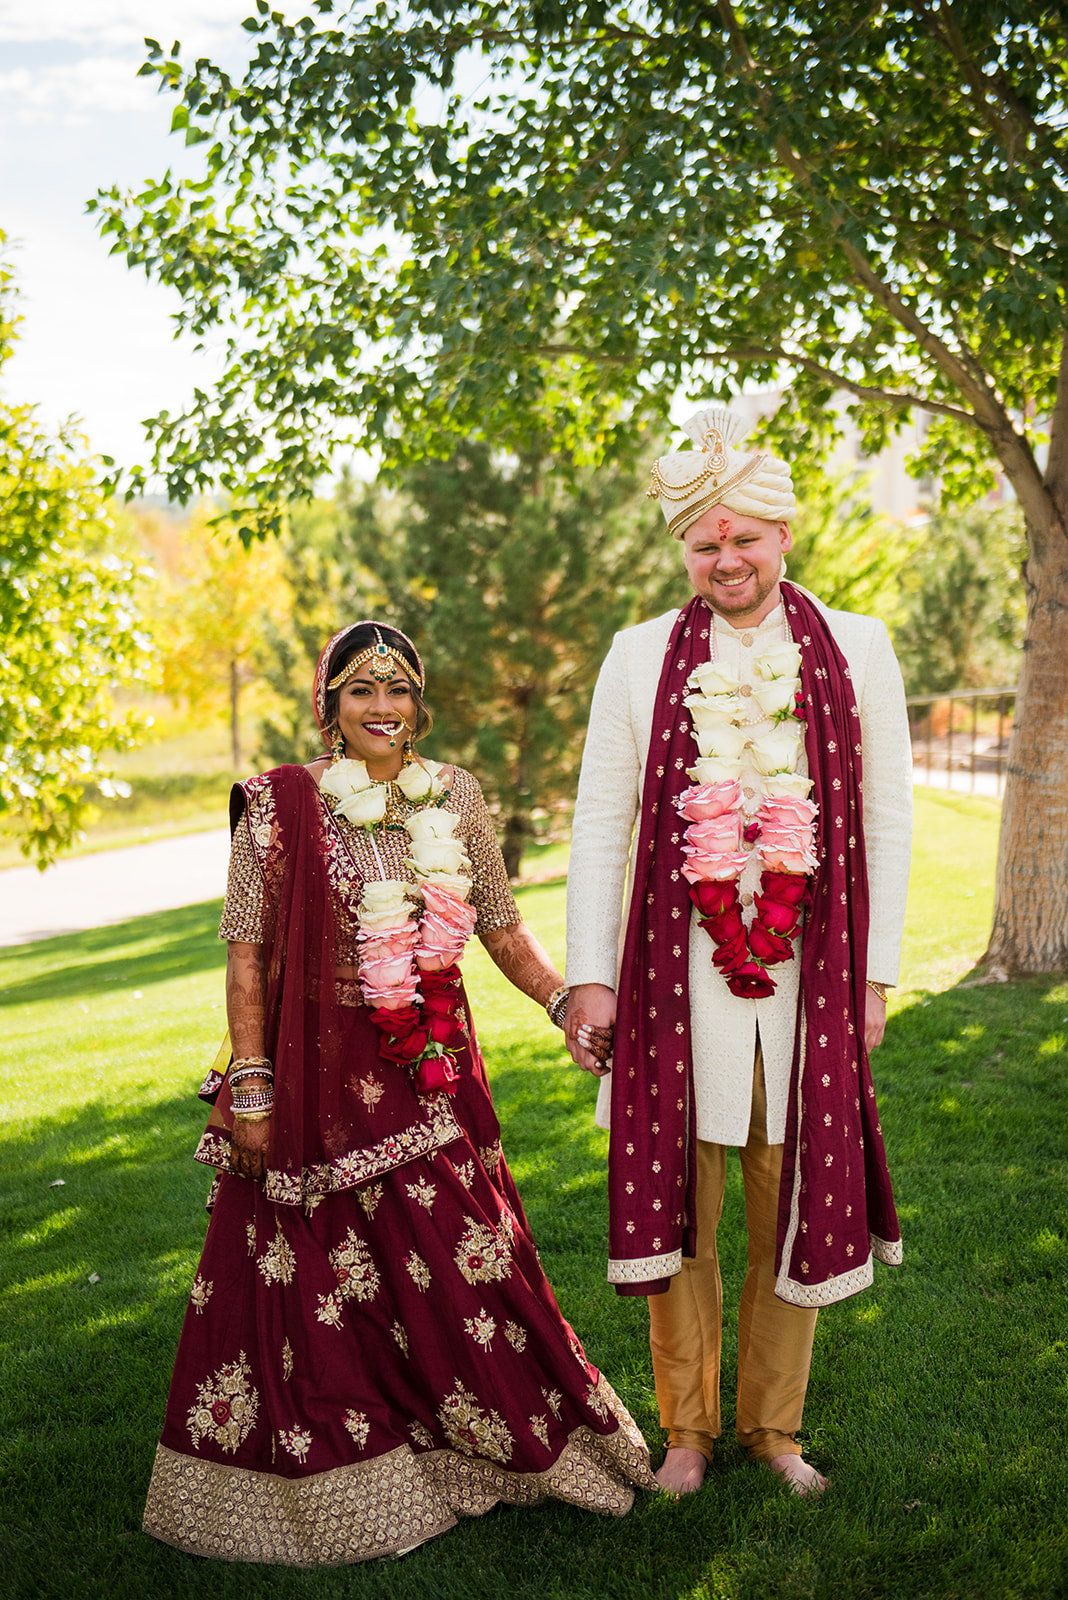 Bride and groom stand facing the camera in their traditional Indian saris.